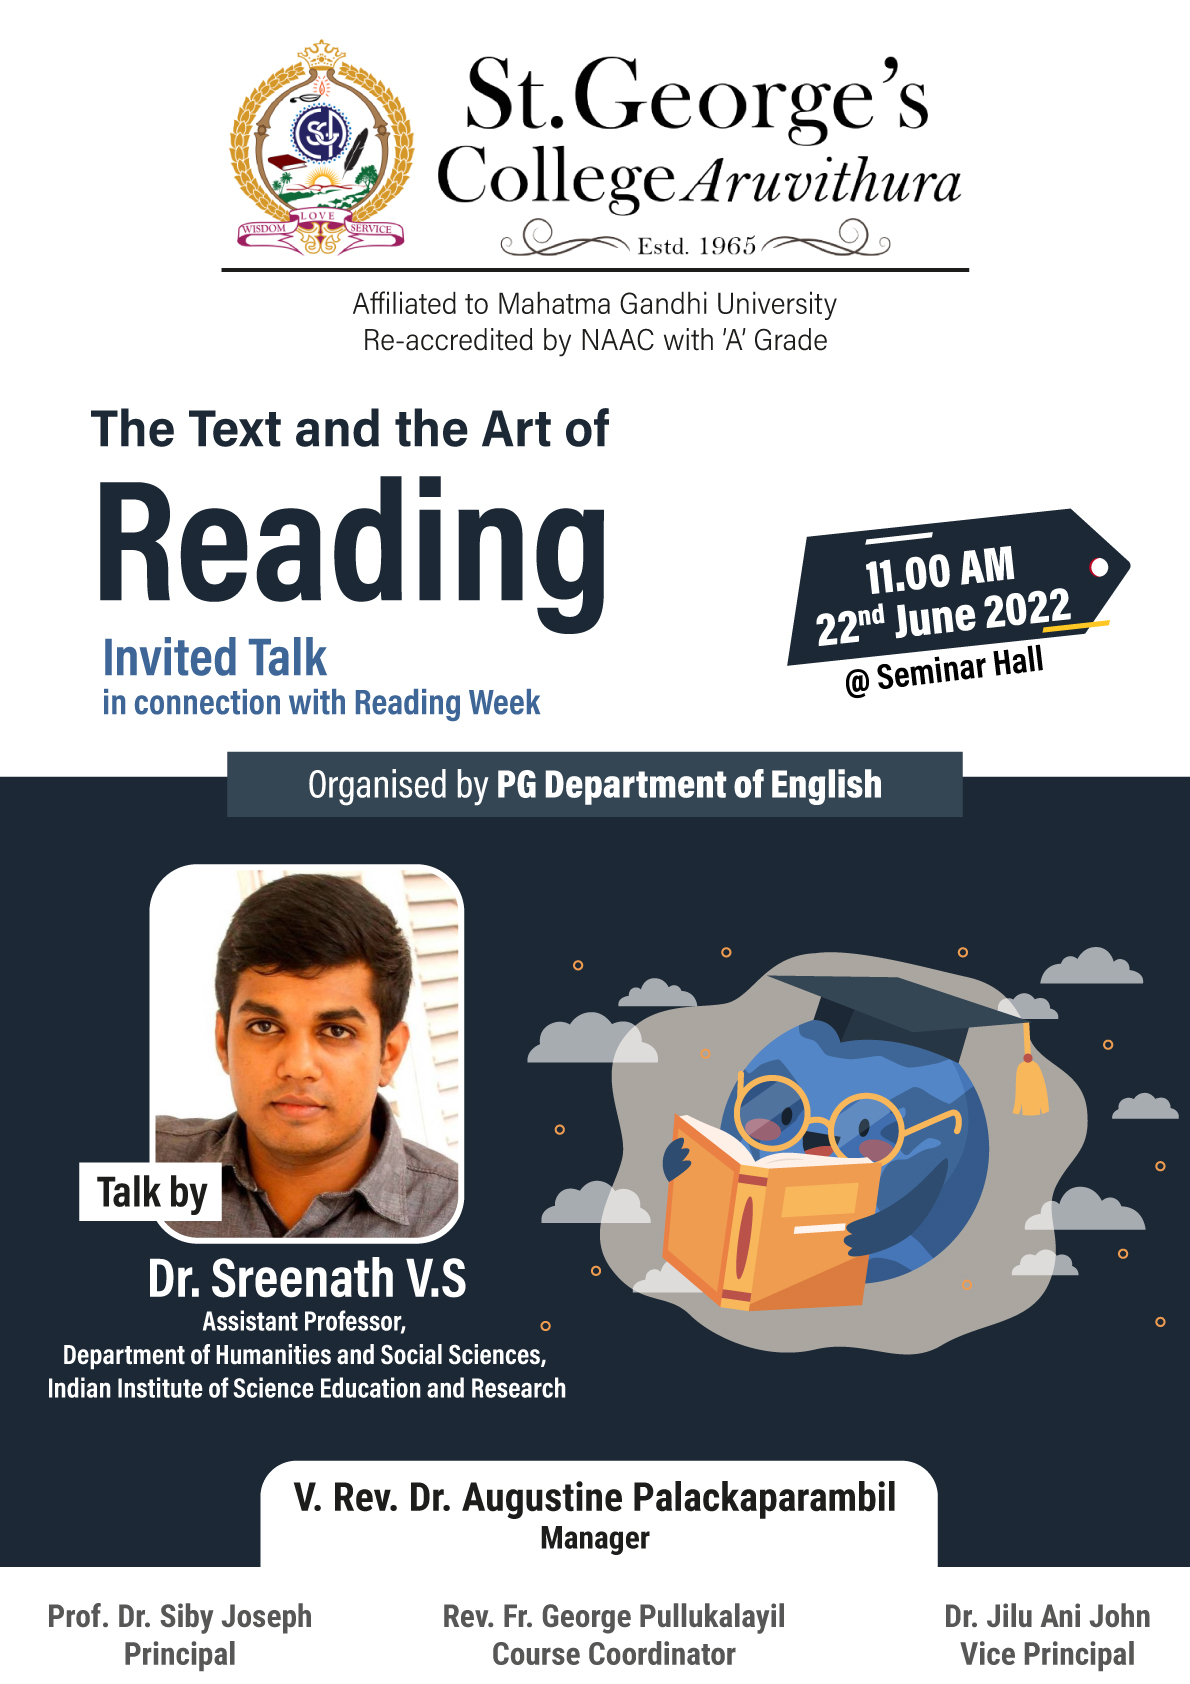 The Text and the Art of Reading - Invited Talk